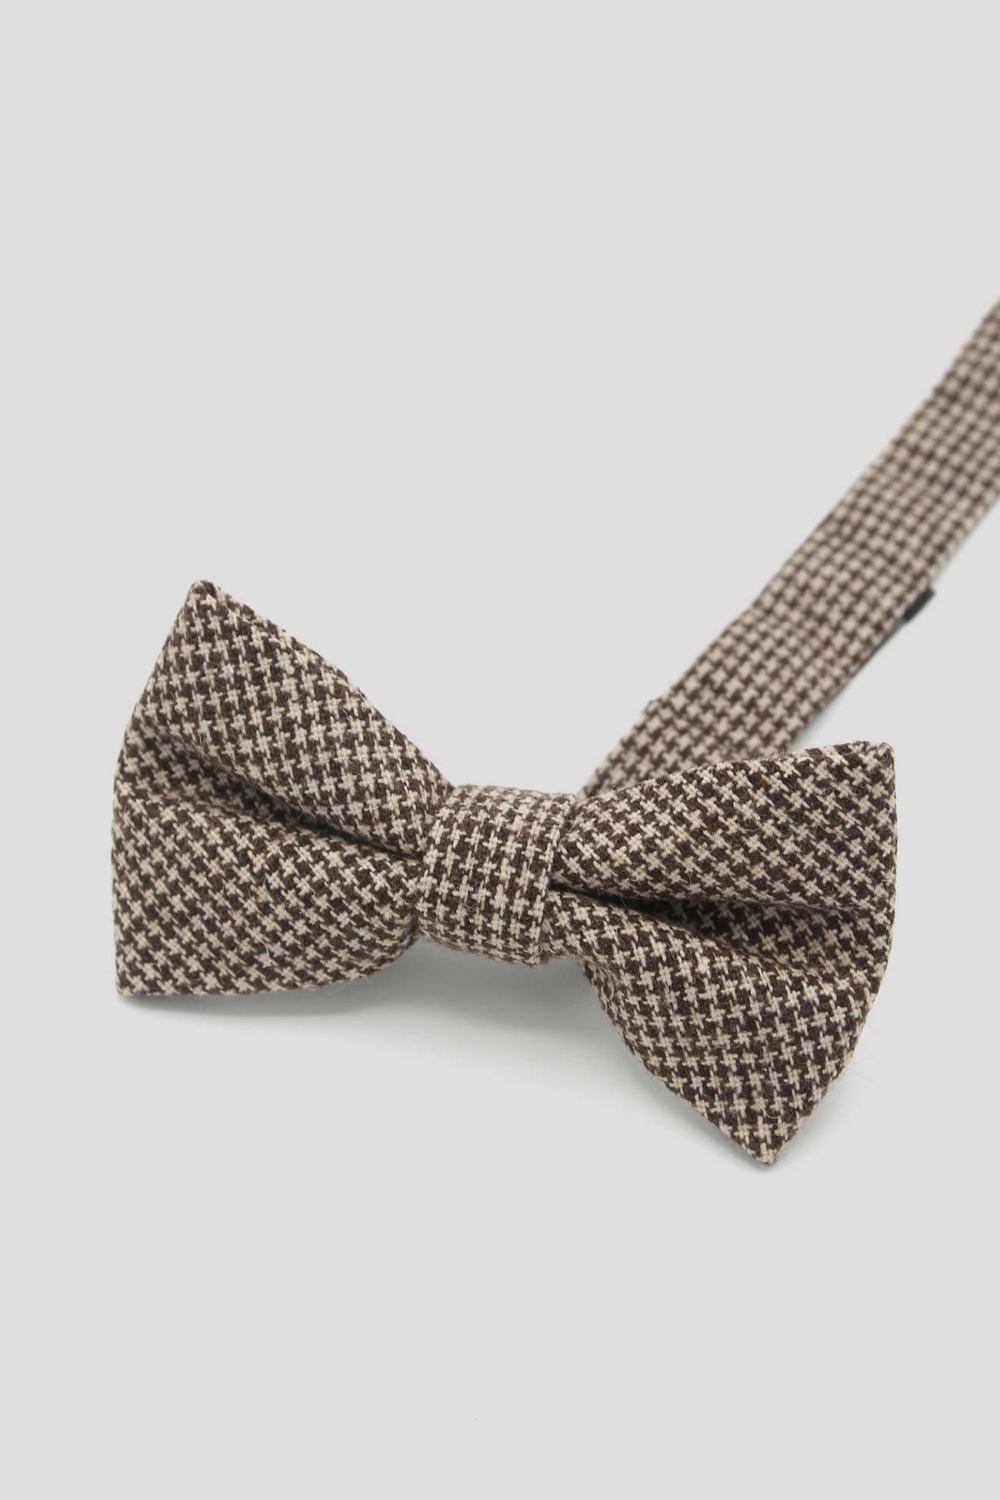 Twisted Tailor Shelby Sons Costa Bowtie Brown 01 2048x2048